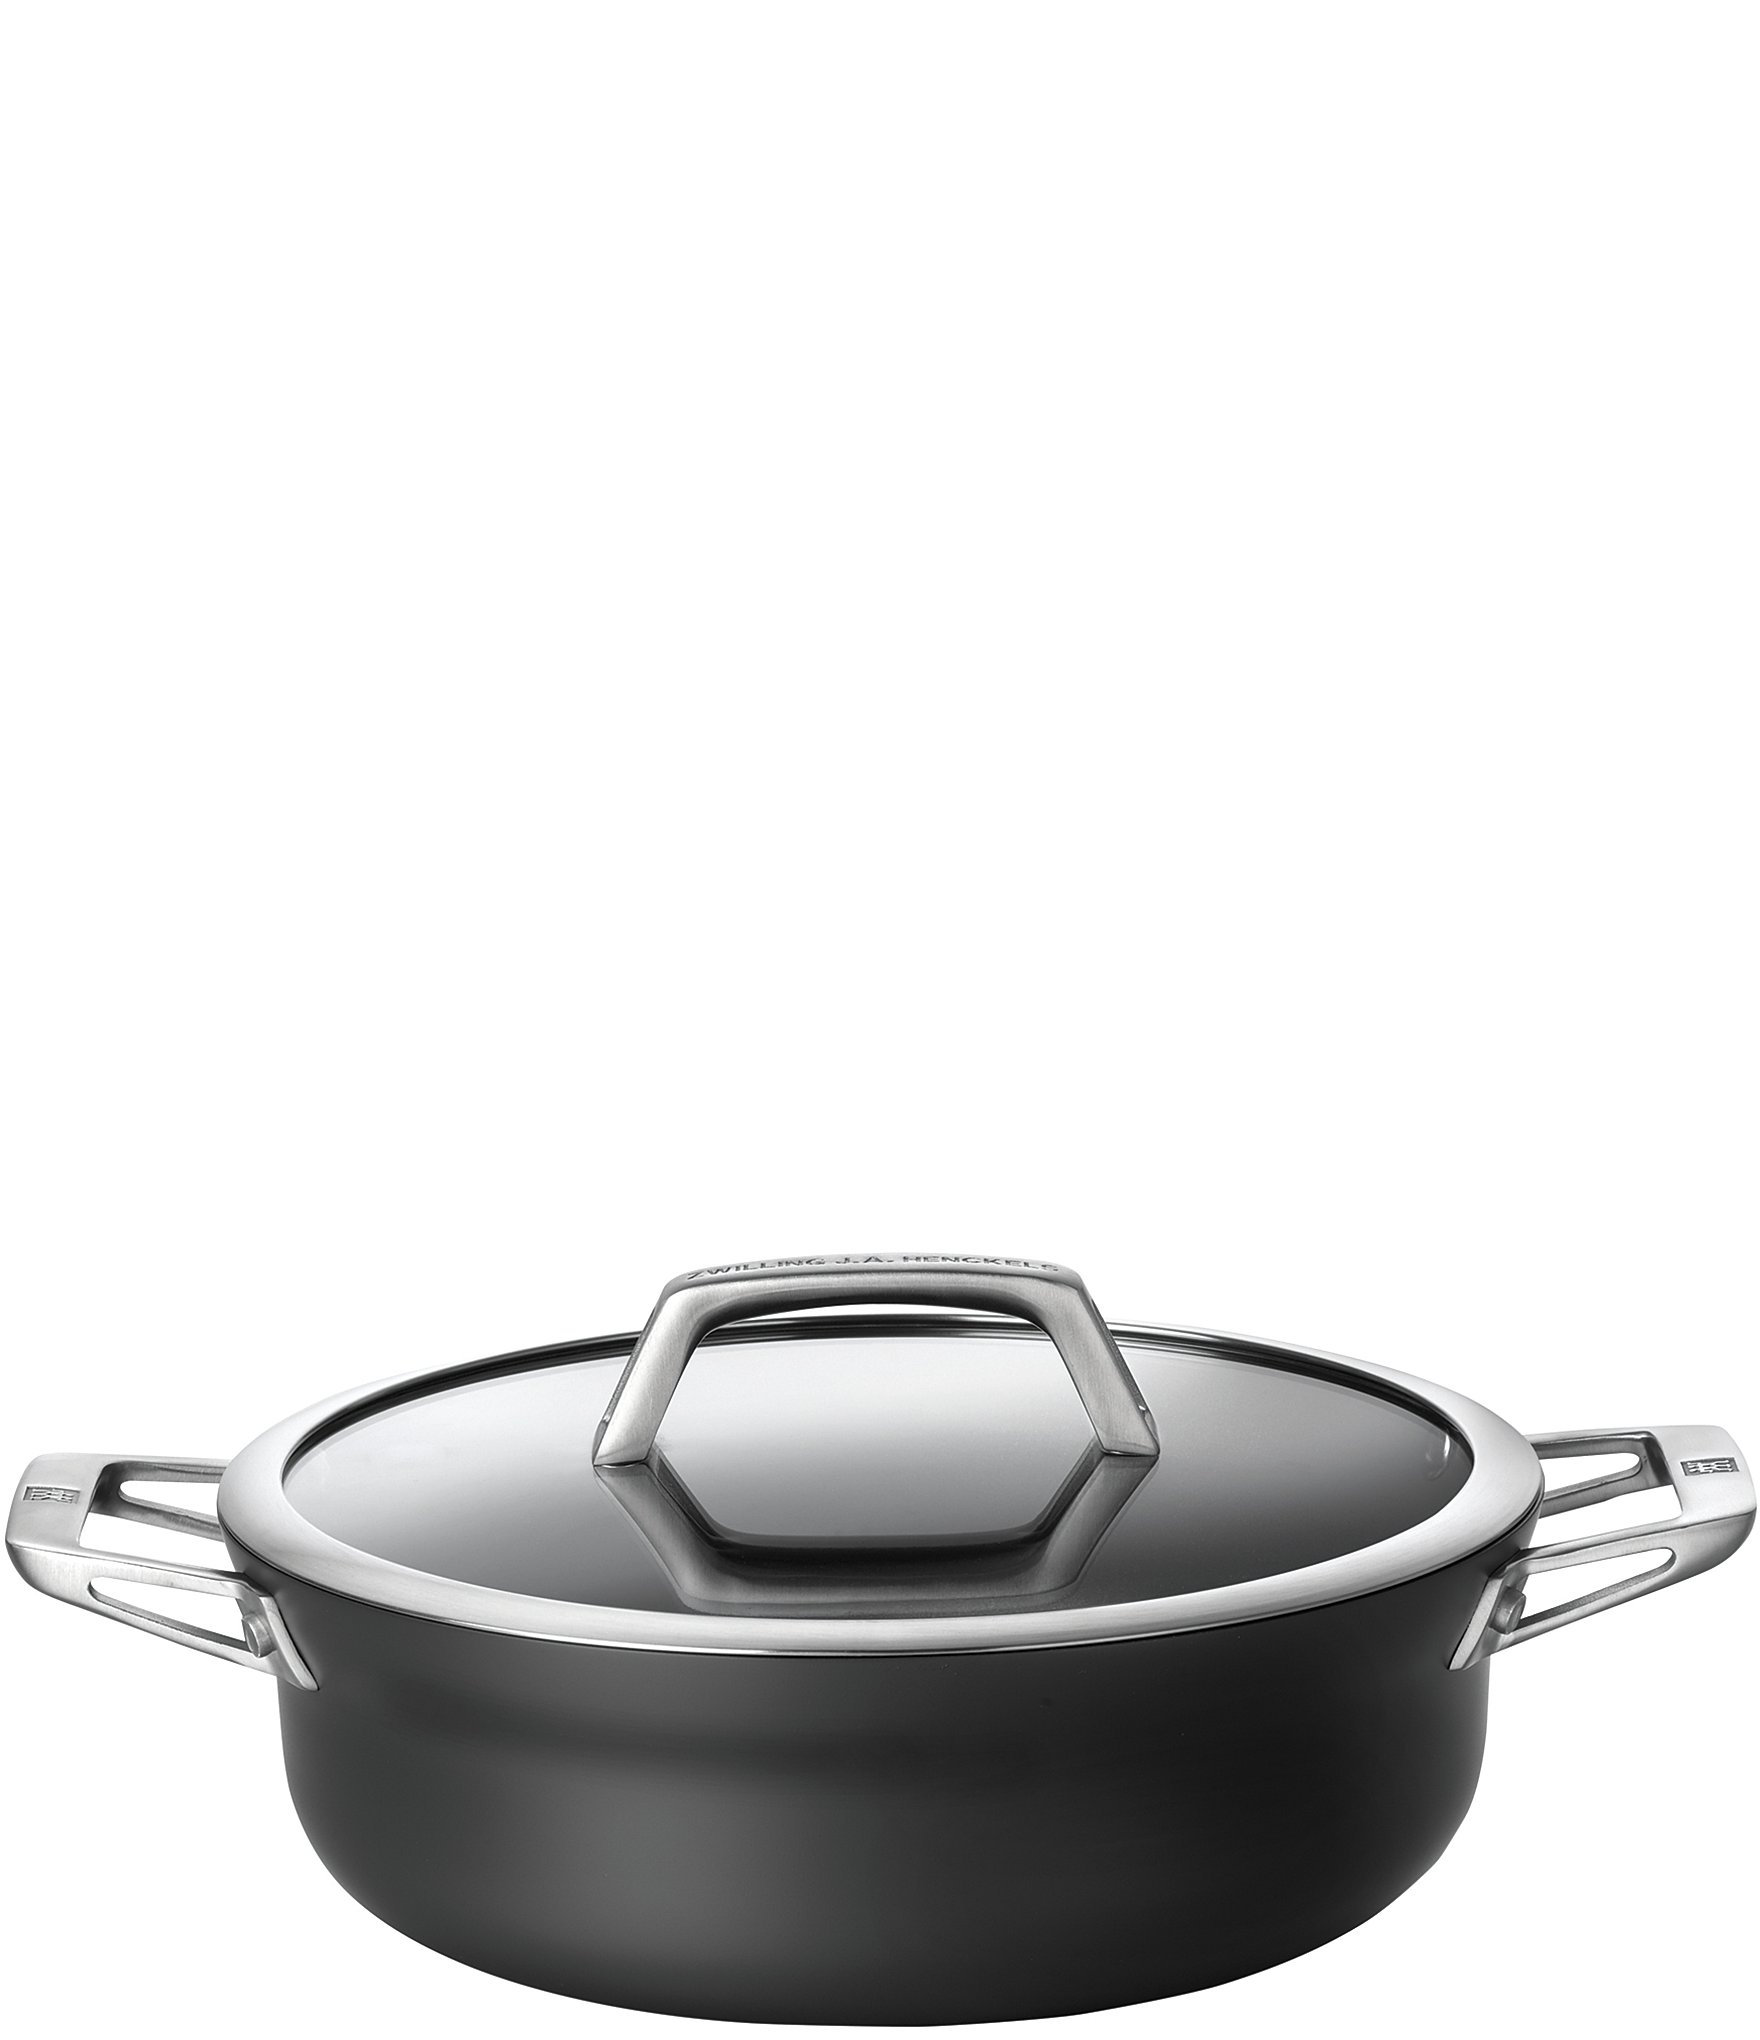 Zwilling - Which Cookware Suits Me? - Chef's Complements